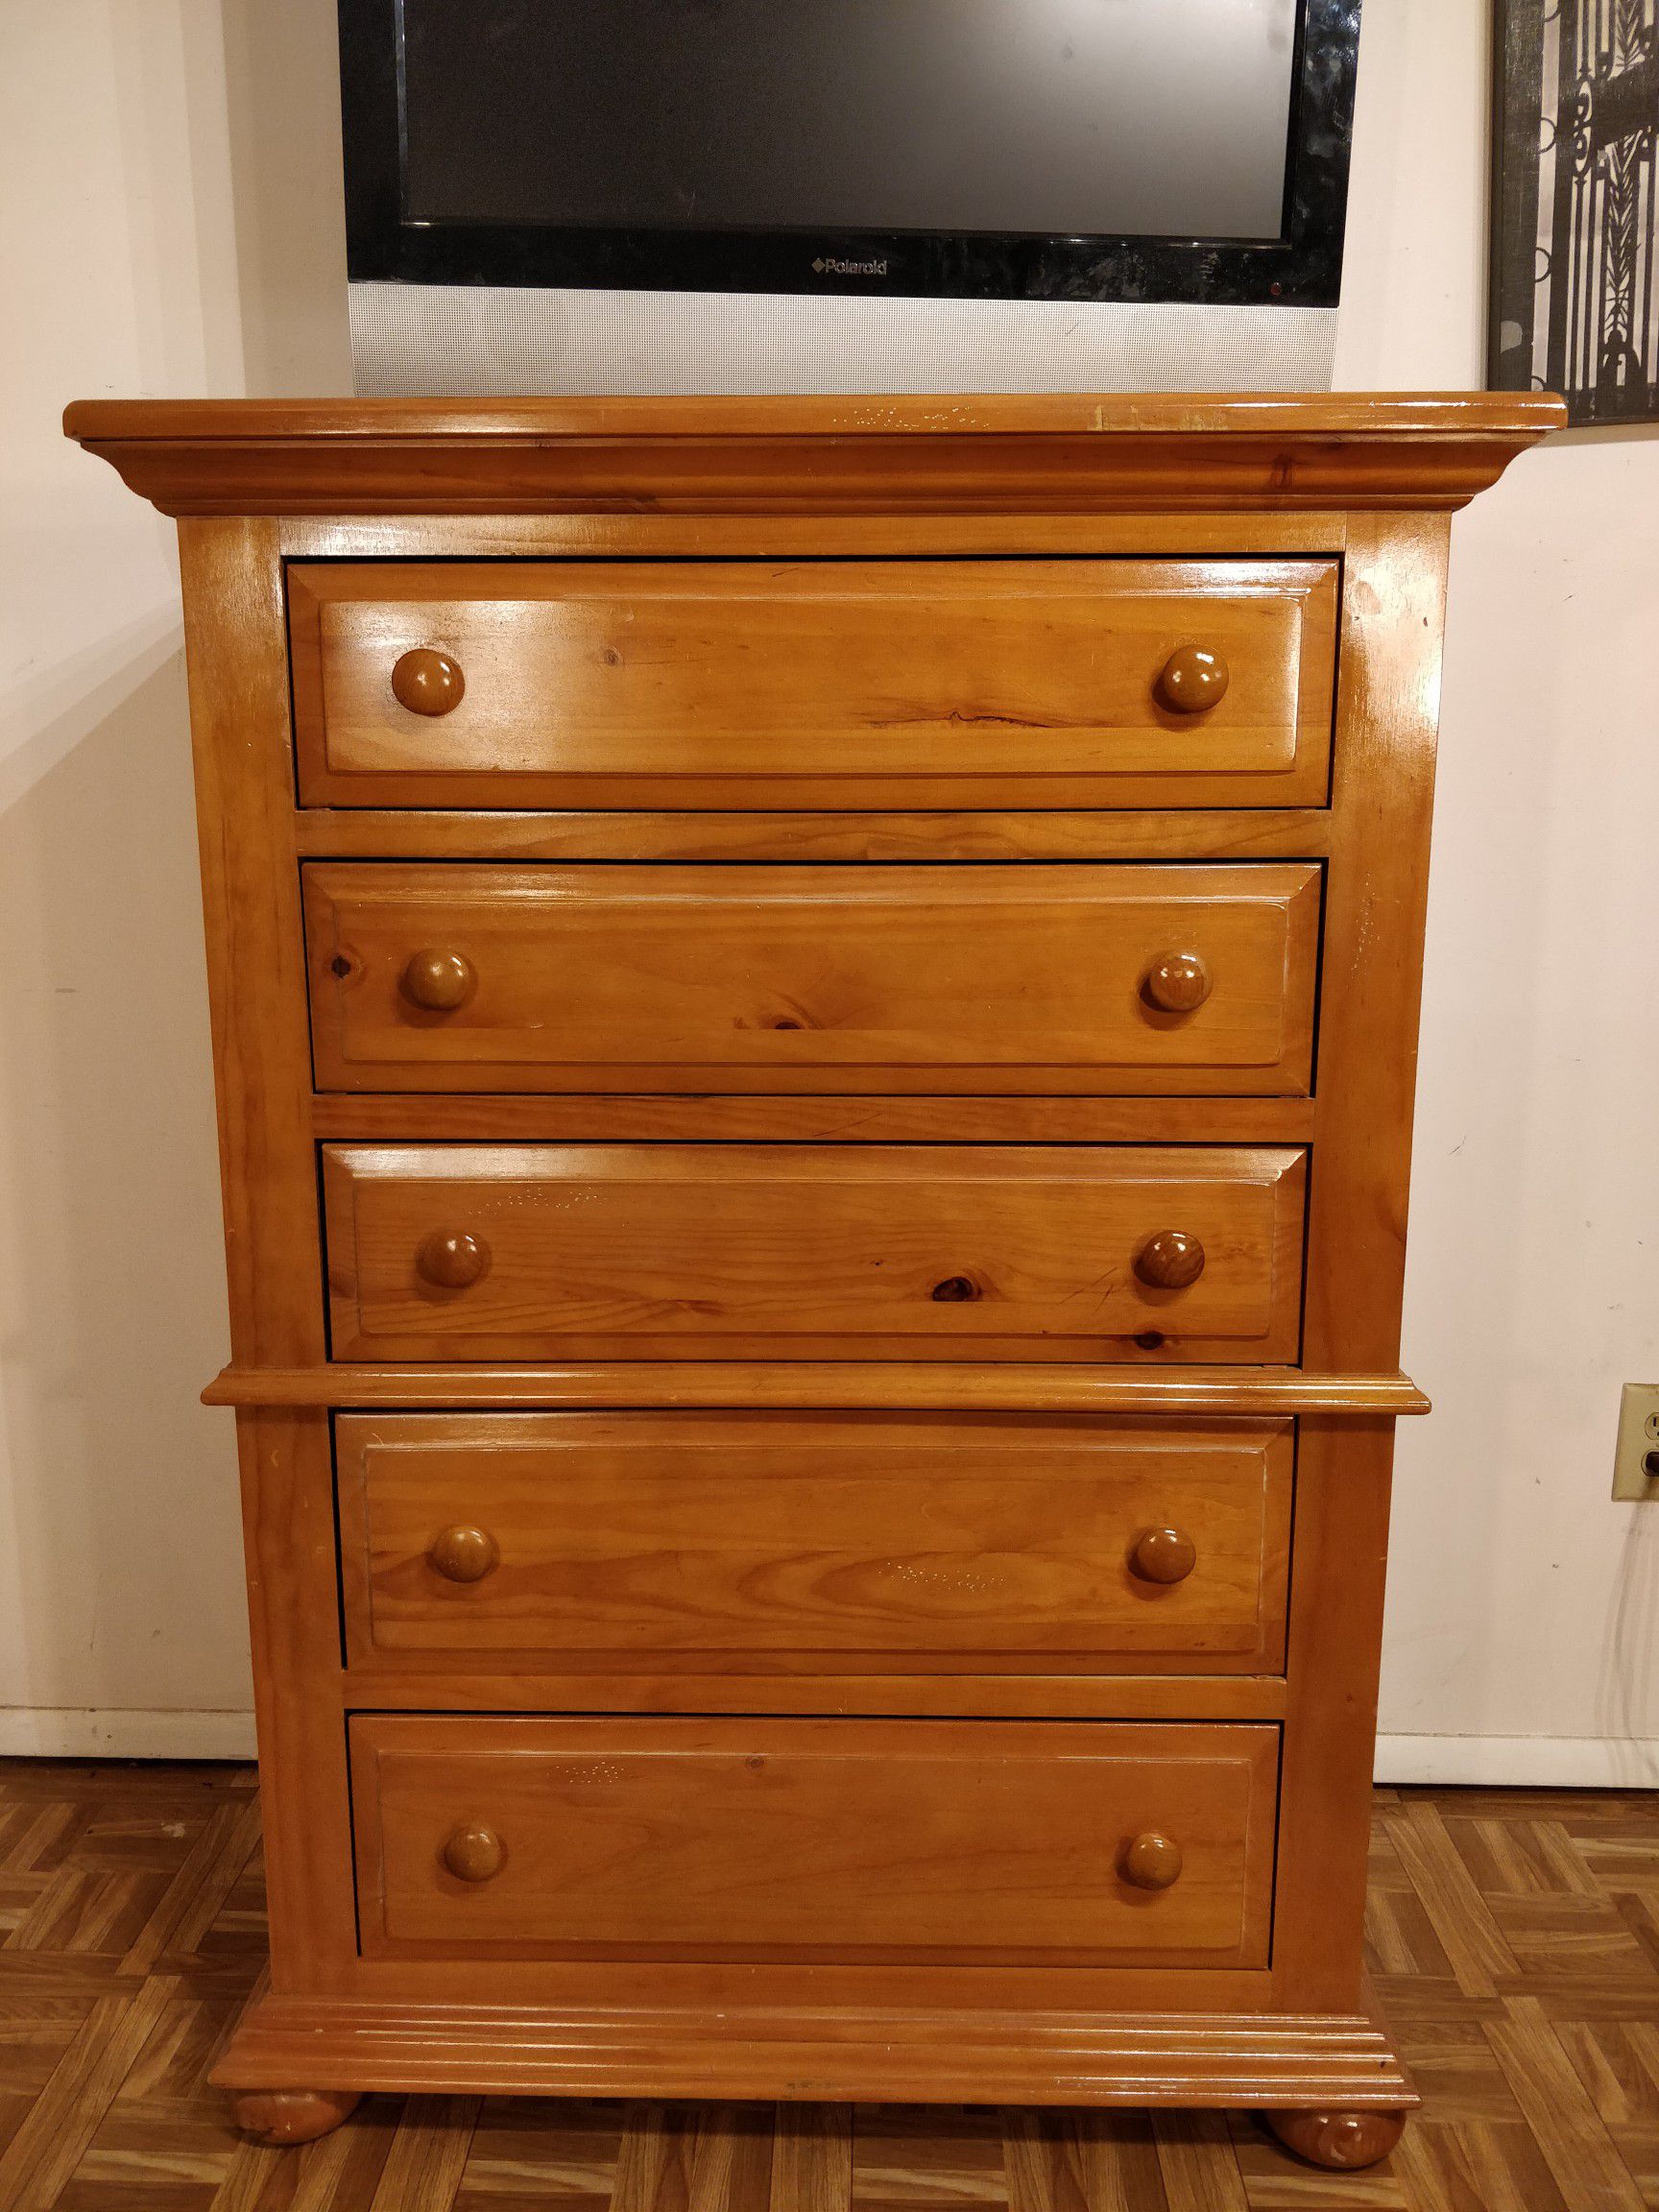 Nice solid wood big chest dresser in good condition, all drawers sliding smoothly, pet free smoke free. L38"*W19"*H52"